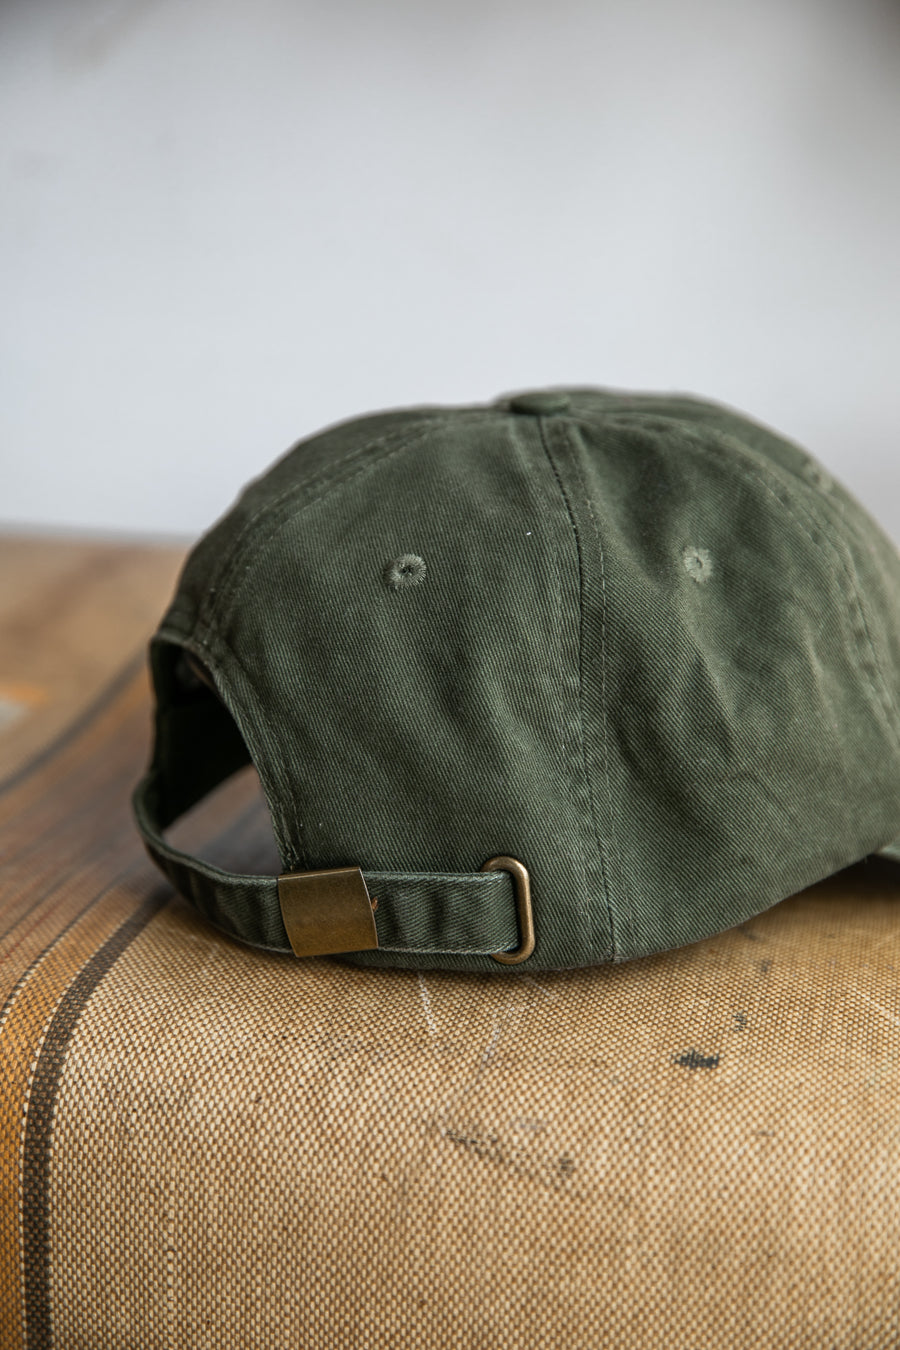 Velvet Cap (Green) The Store of Quality Fashion Items